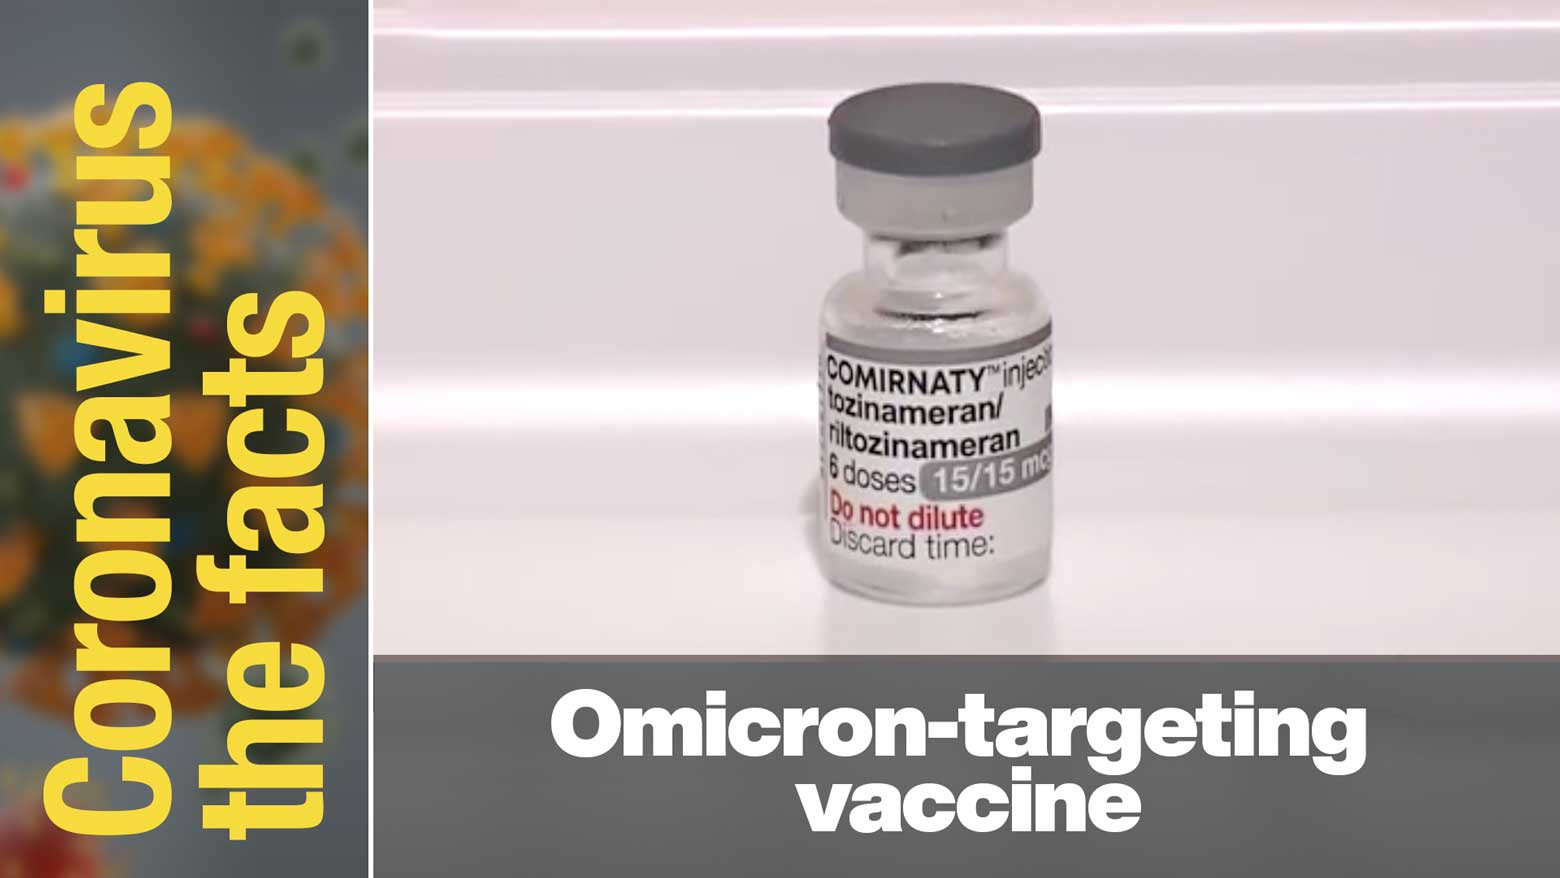 Japan rolls out vaccines against Omicron